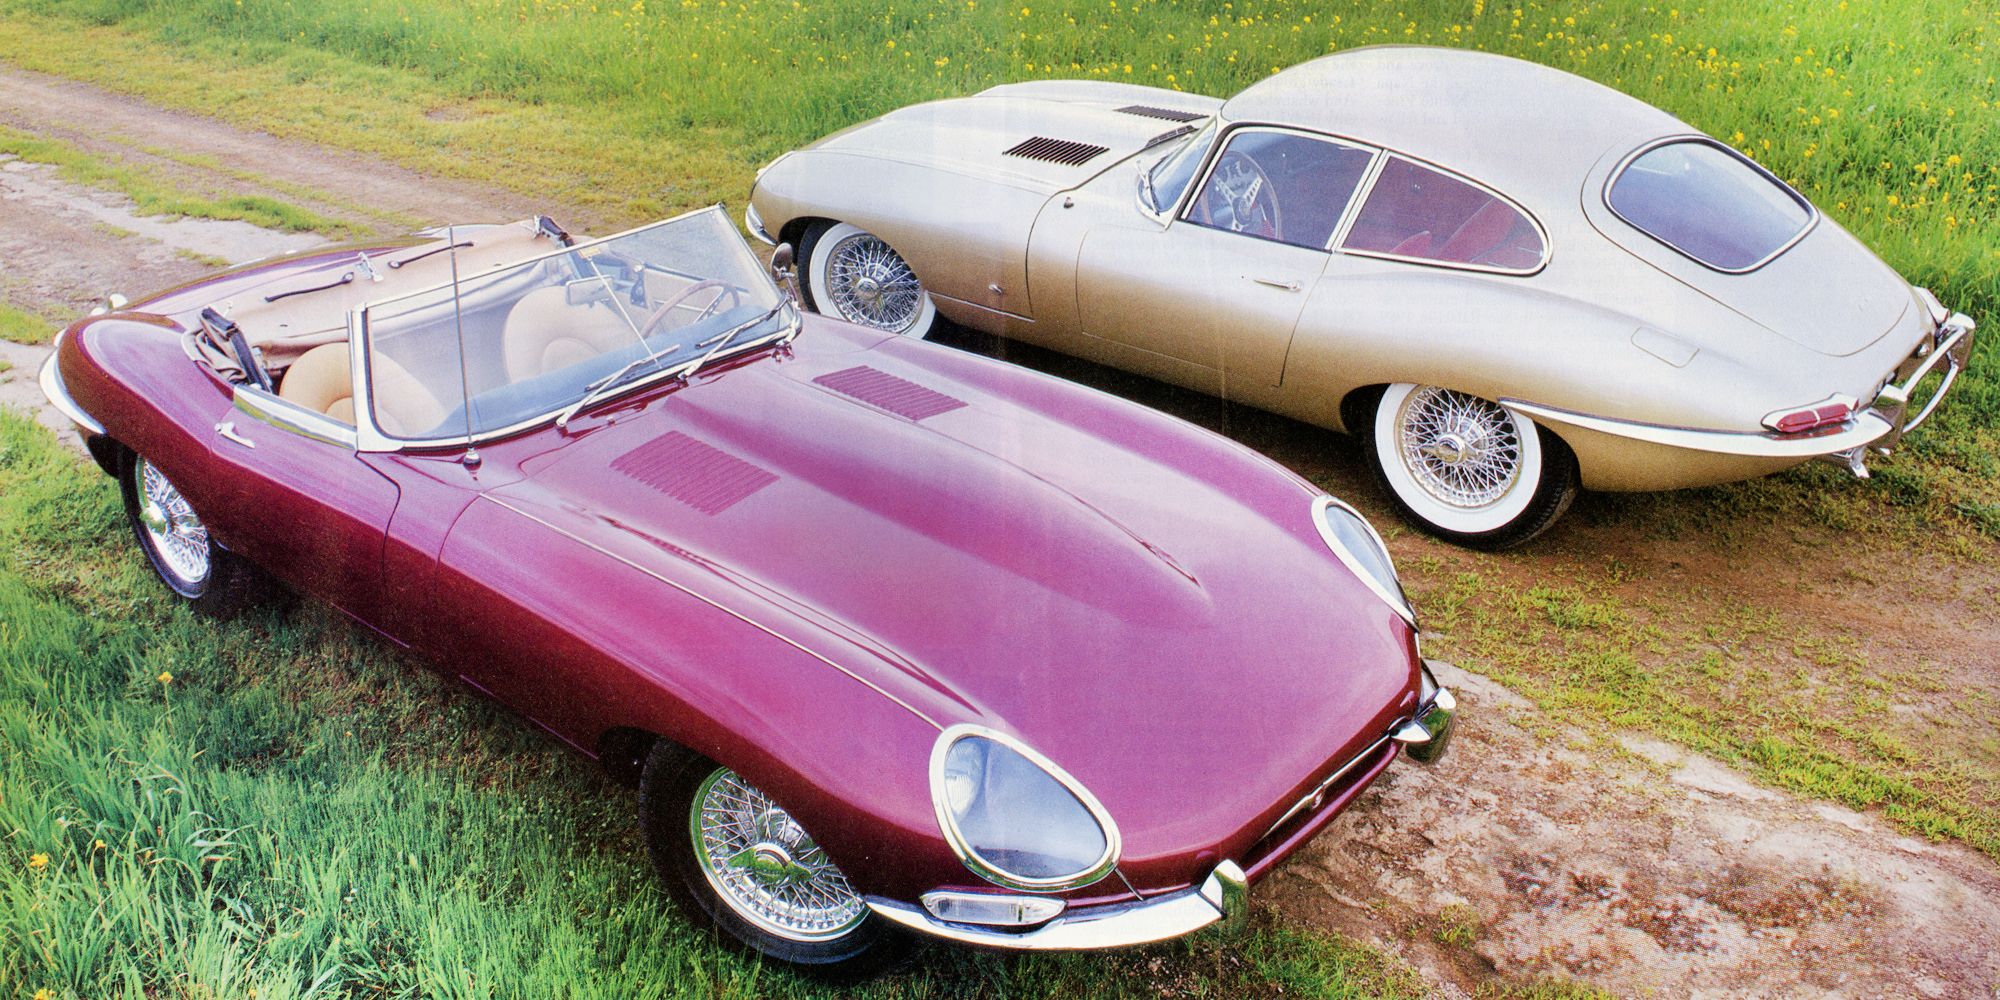 The Jaguar E-Type Lives Up to the Hype